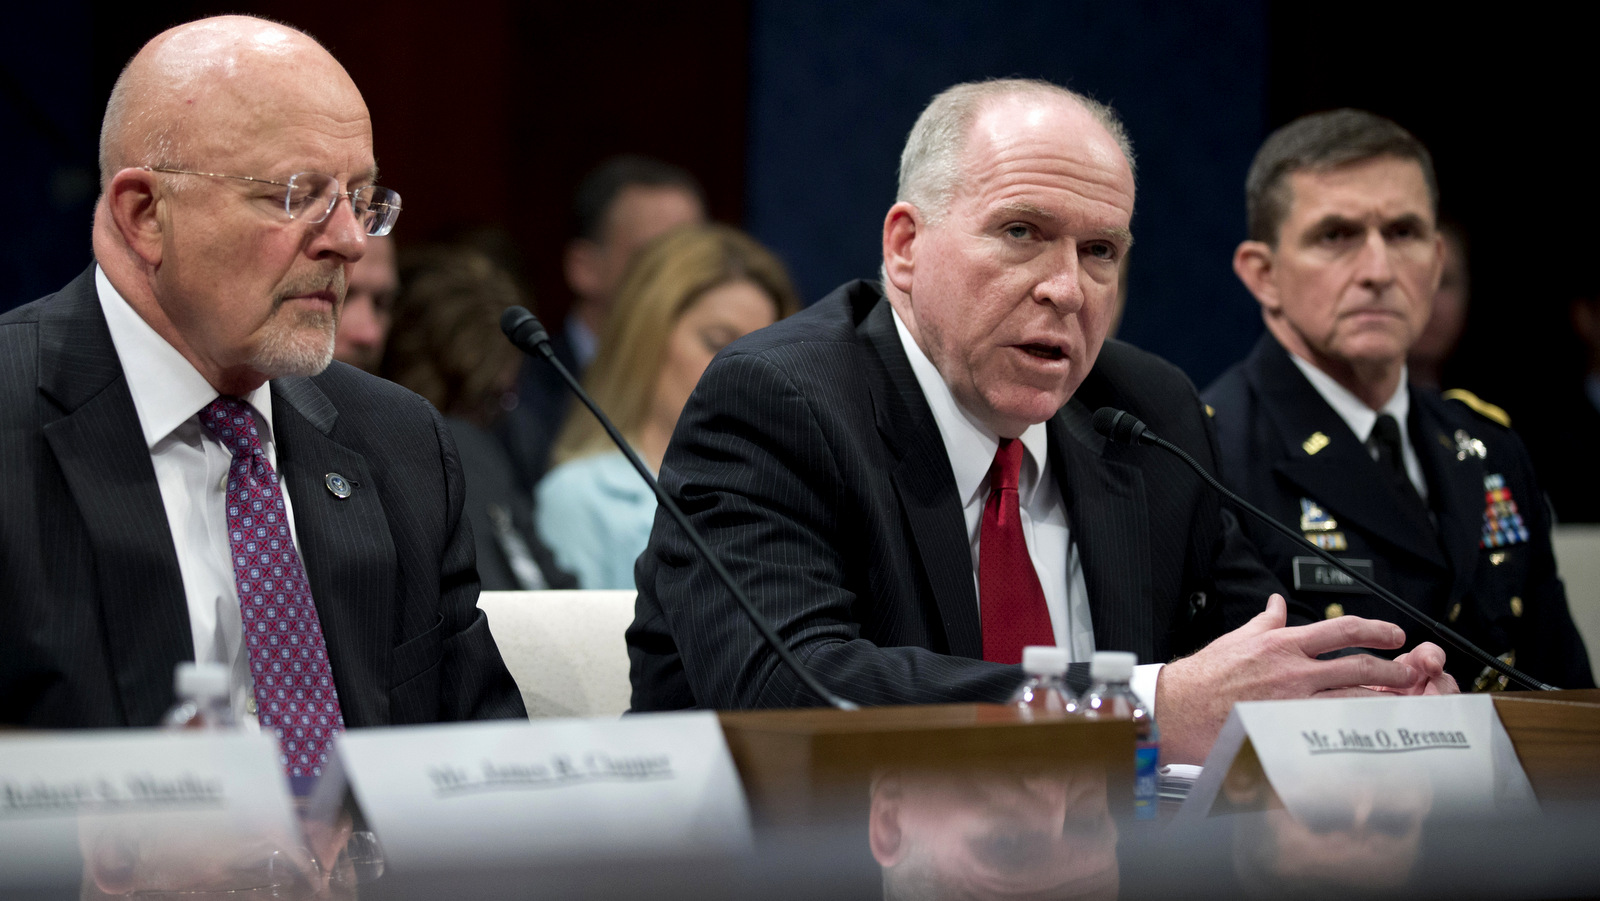 From left, National Intelligence Director James Clapper; CIA Director John Brennan; and Defense Intelligence Agency Director, Department of Defense Lt. Gen. Michael Flynn, testify on Capitol Hill in Washington, Thursday, April 11, 2013, before the House Intelligence Committee hearing on worldwide threats. (AP/Manuel Balce Ceneta)